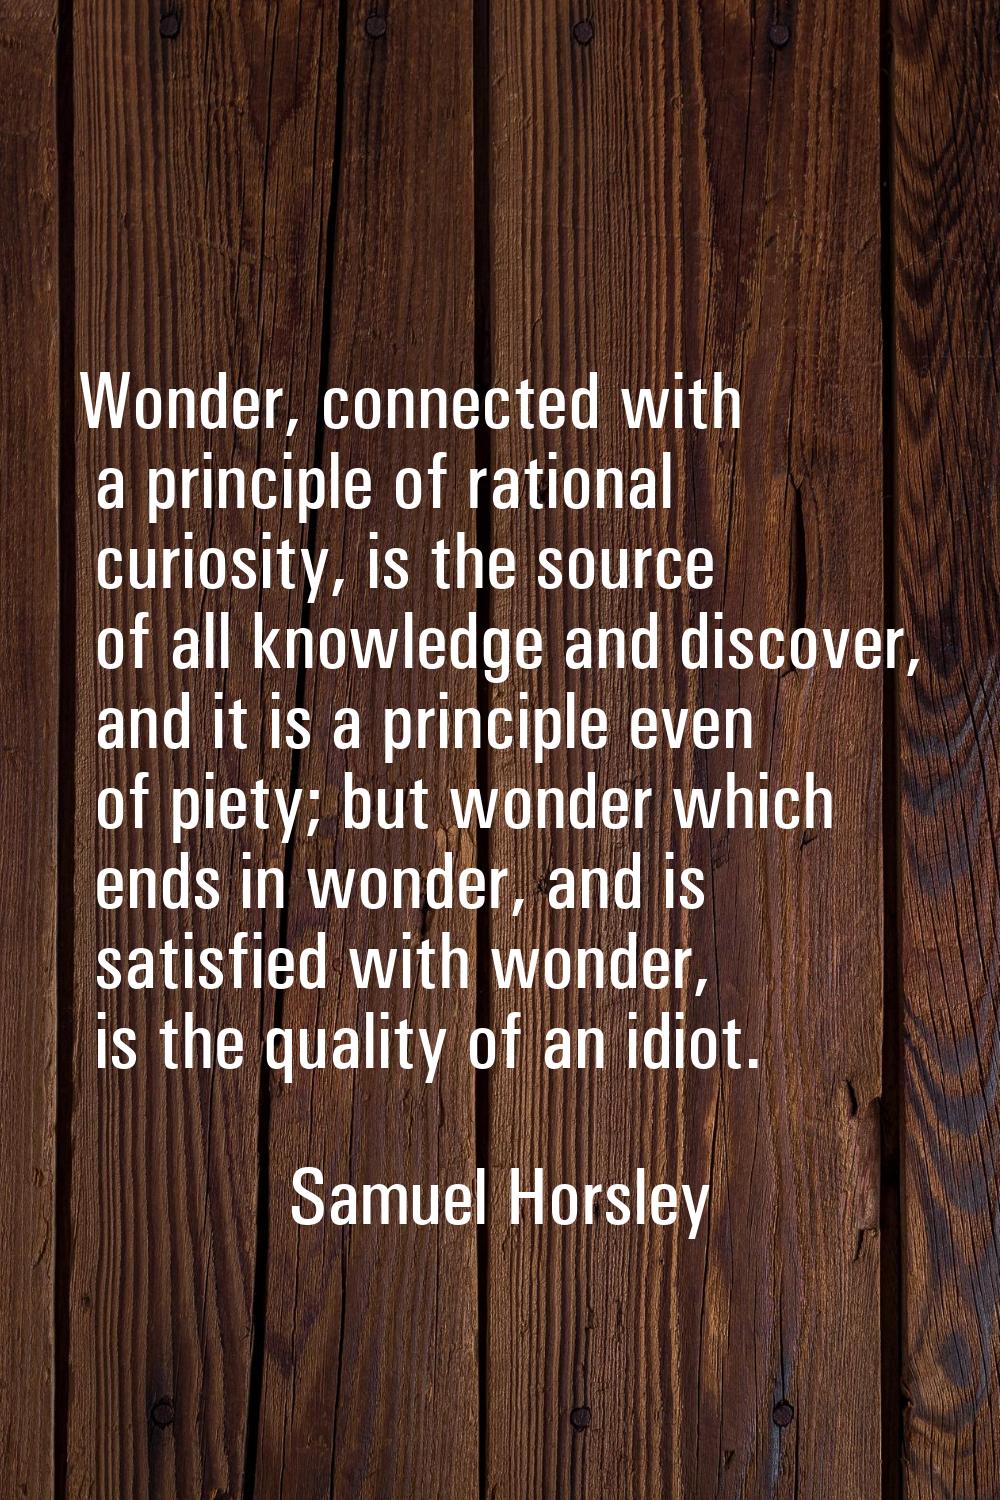 Wonder, connected with a principle of rational curiosity, is the source of all knowledge and discov